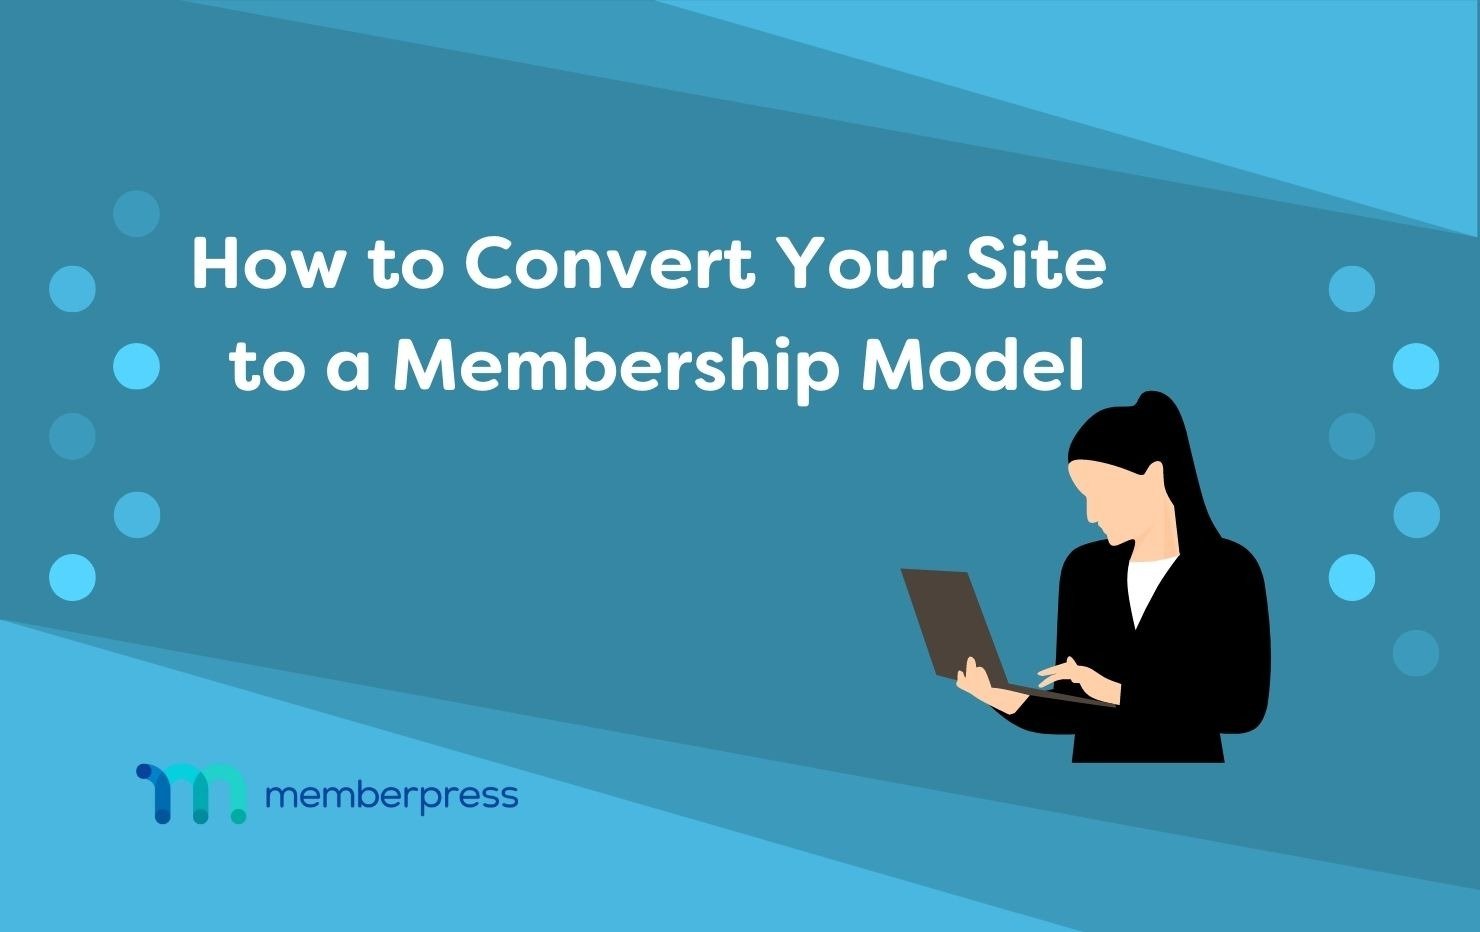 A woman is working on a tablet or phone Text reads How to Convert Your Site to a Membership Model